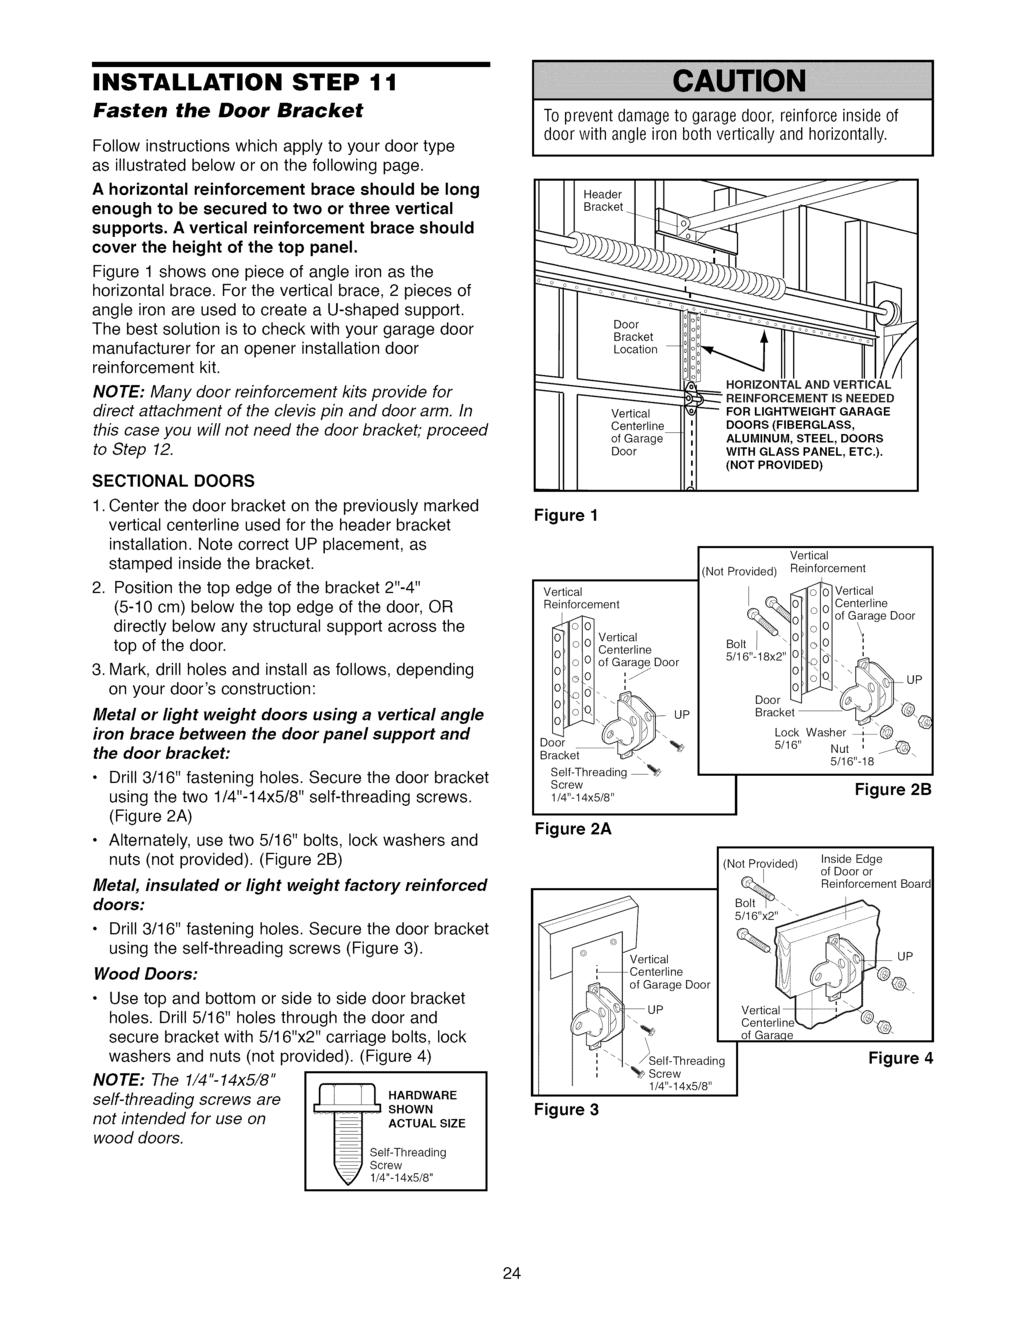 INSTALLATION STEP 11 Fasten the Bracket Follow instructions which apply to your door type as illustrated below or on the following page.